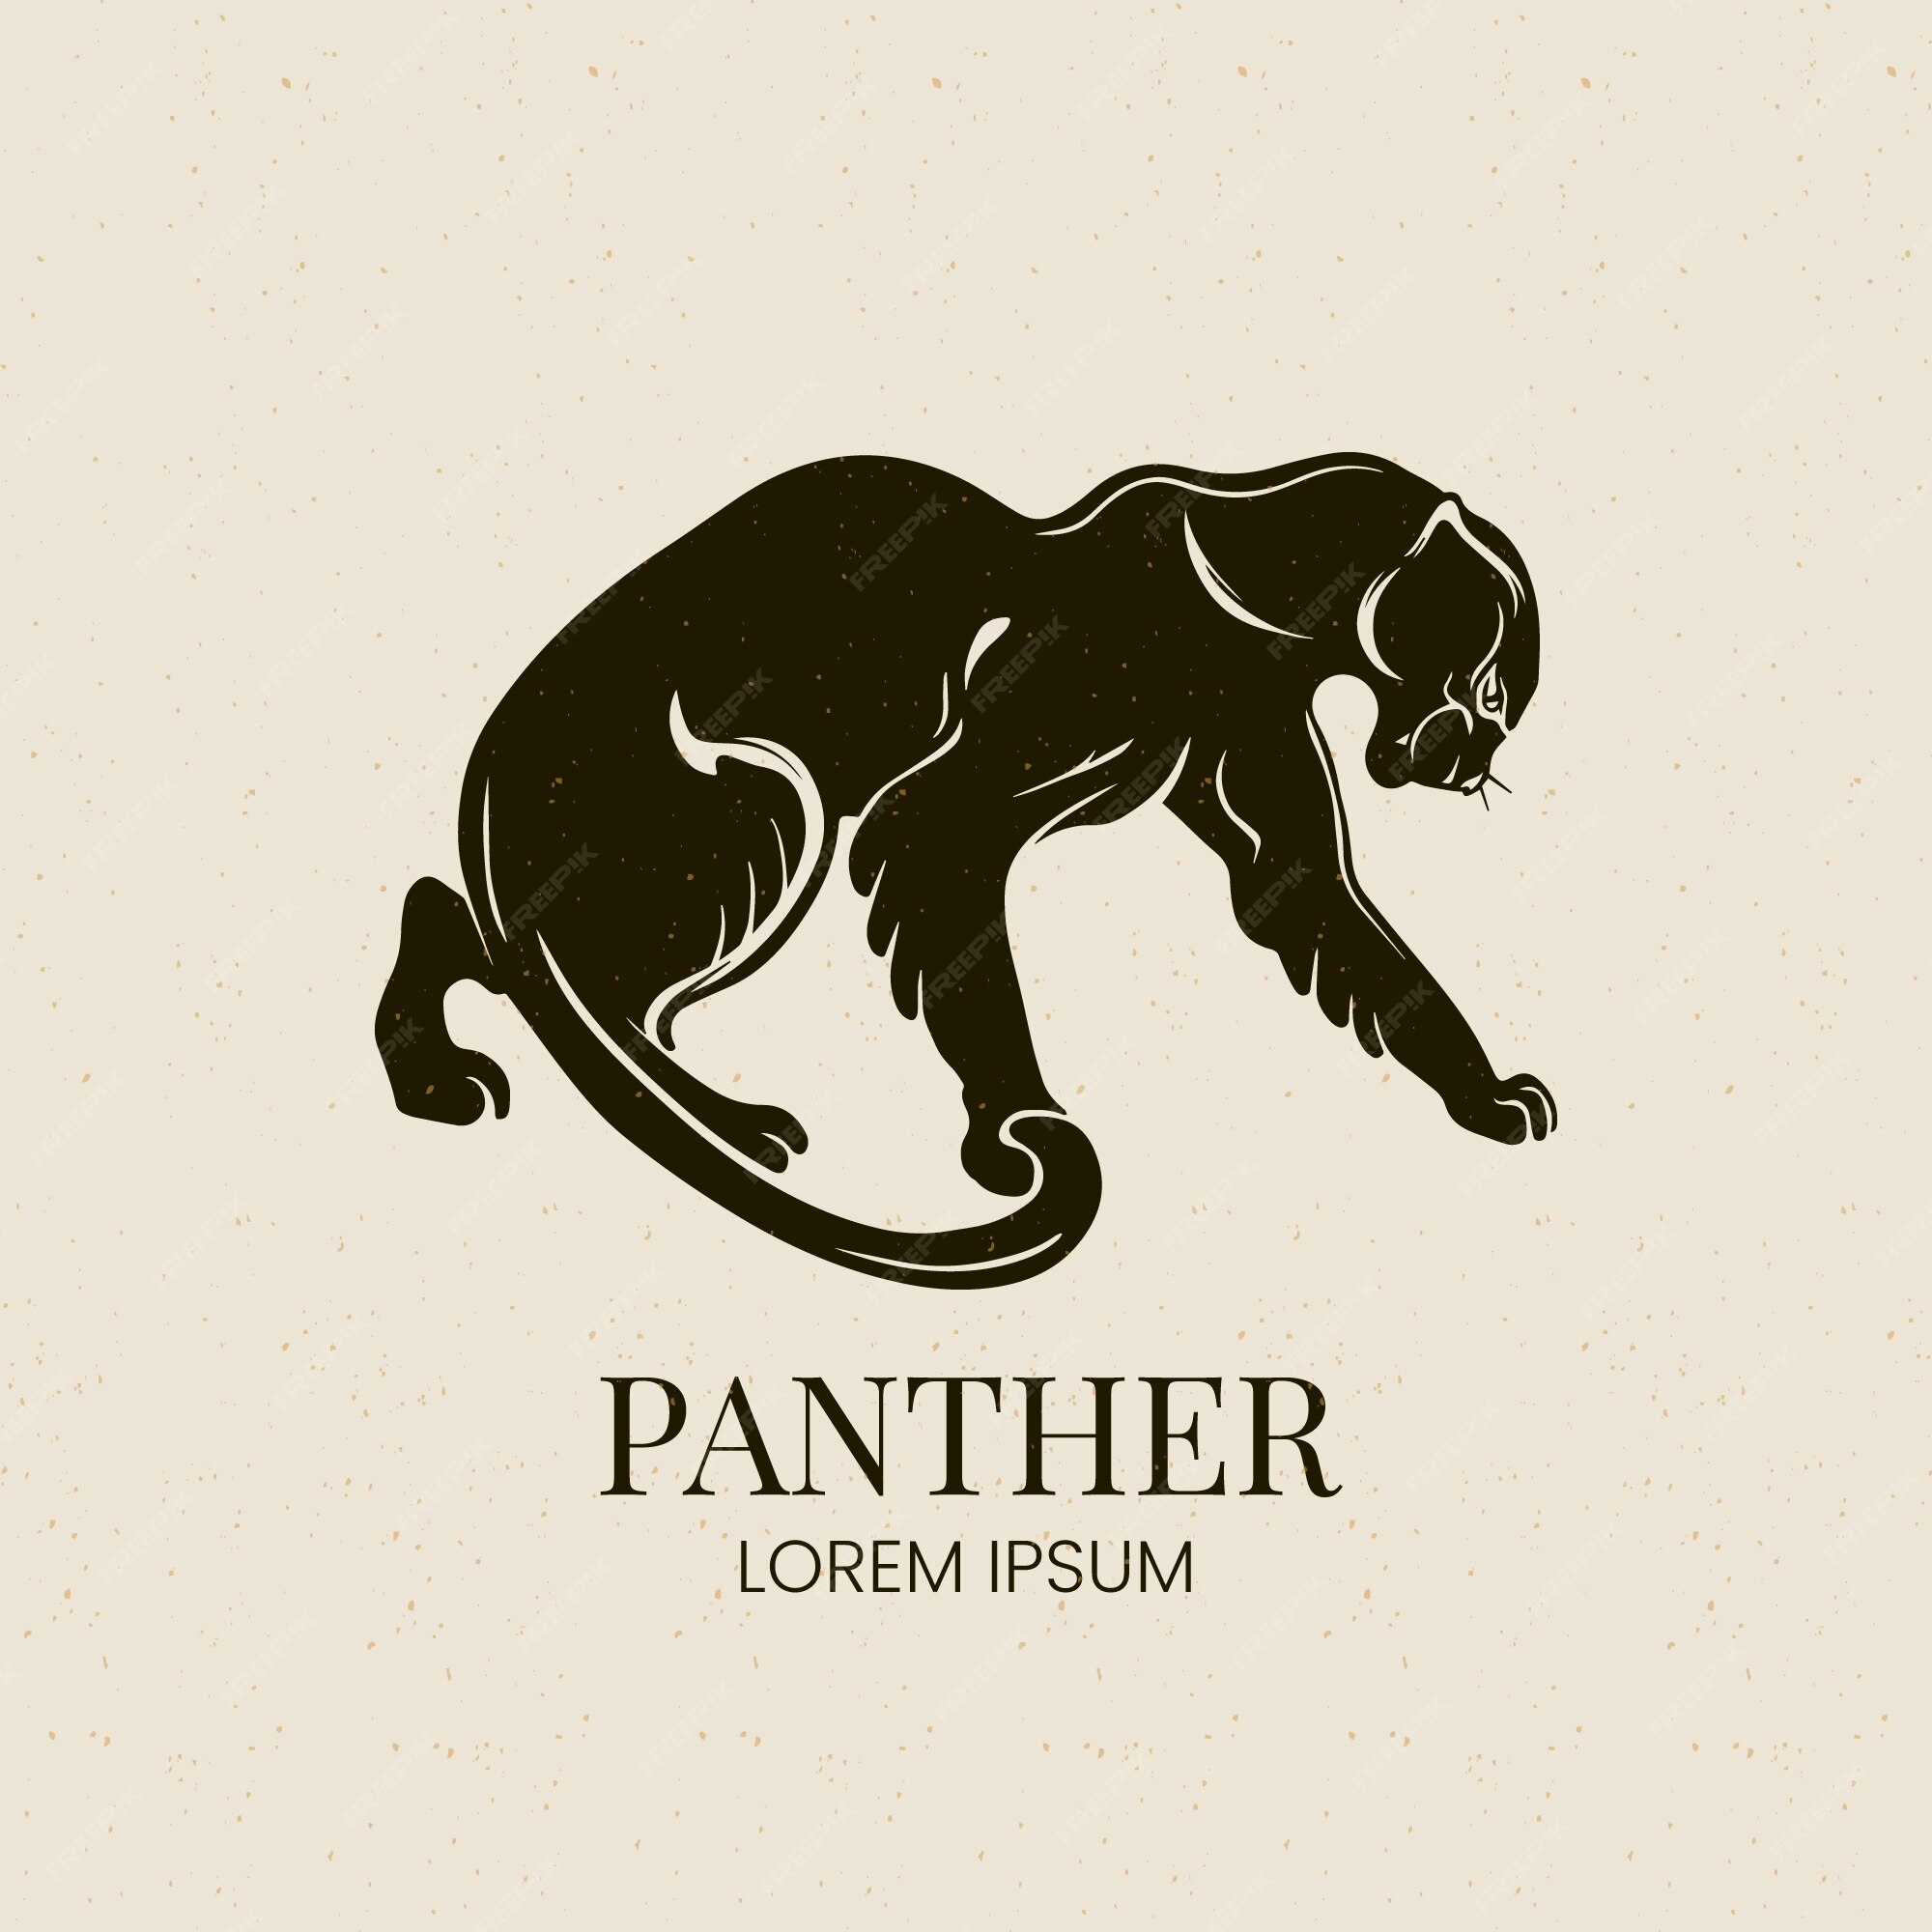 Panther Silhouette Images - Free Download on Freepik